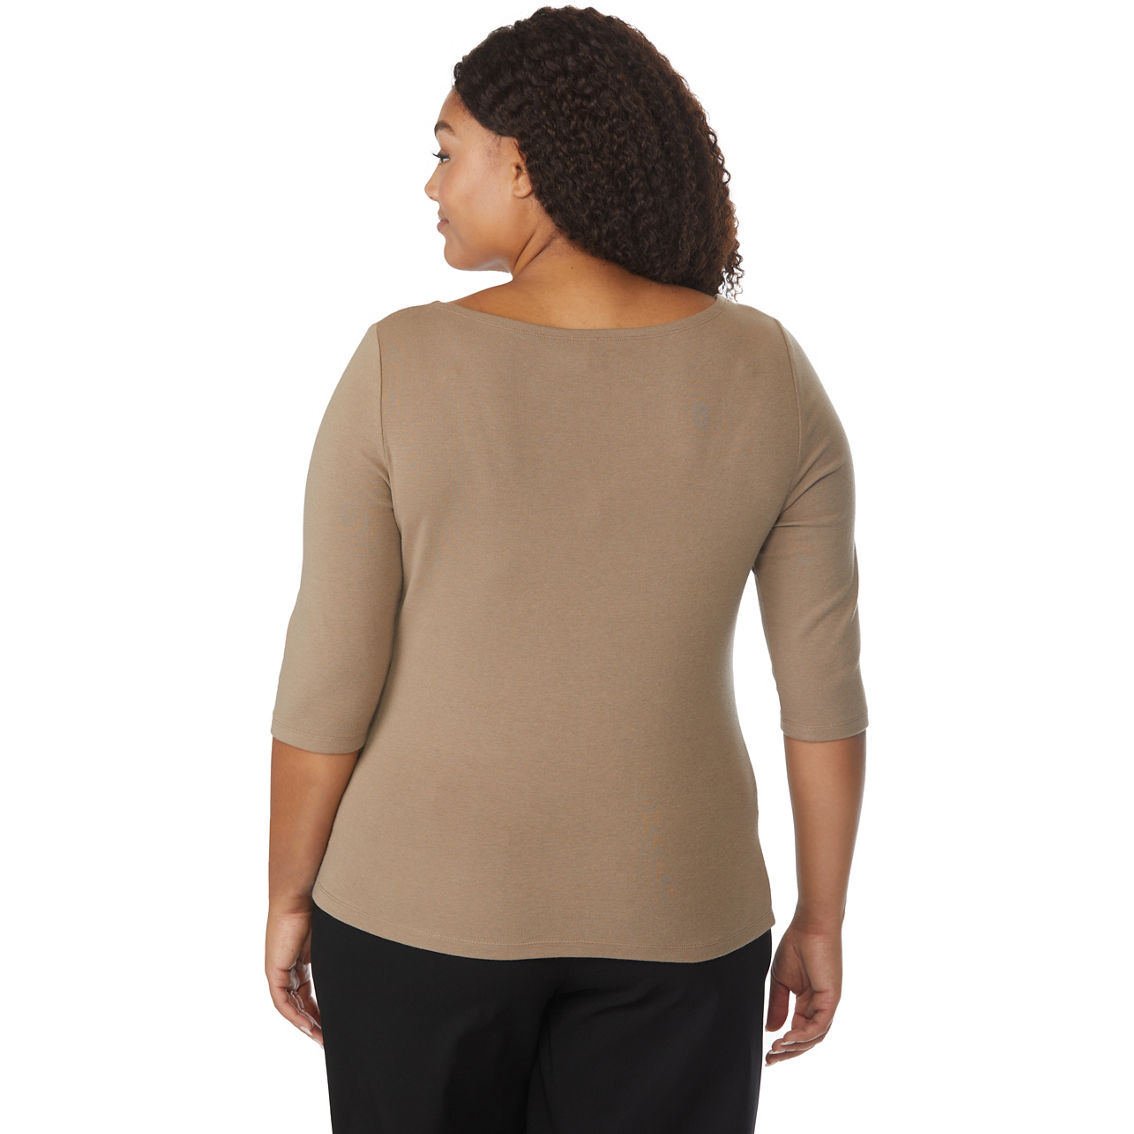 Passports Plus Size Boat Neck Top - Image 2 of 3